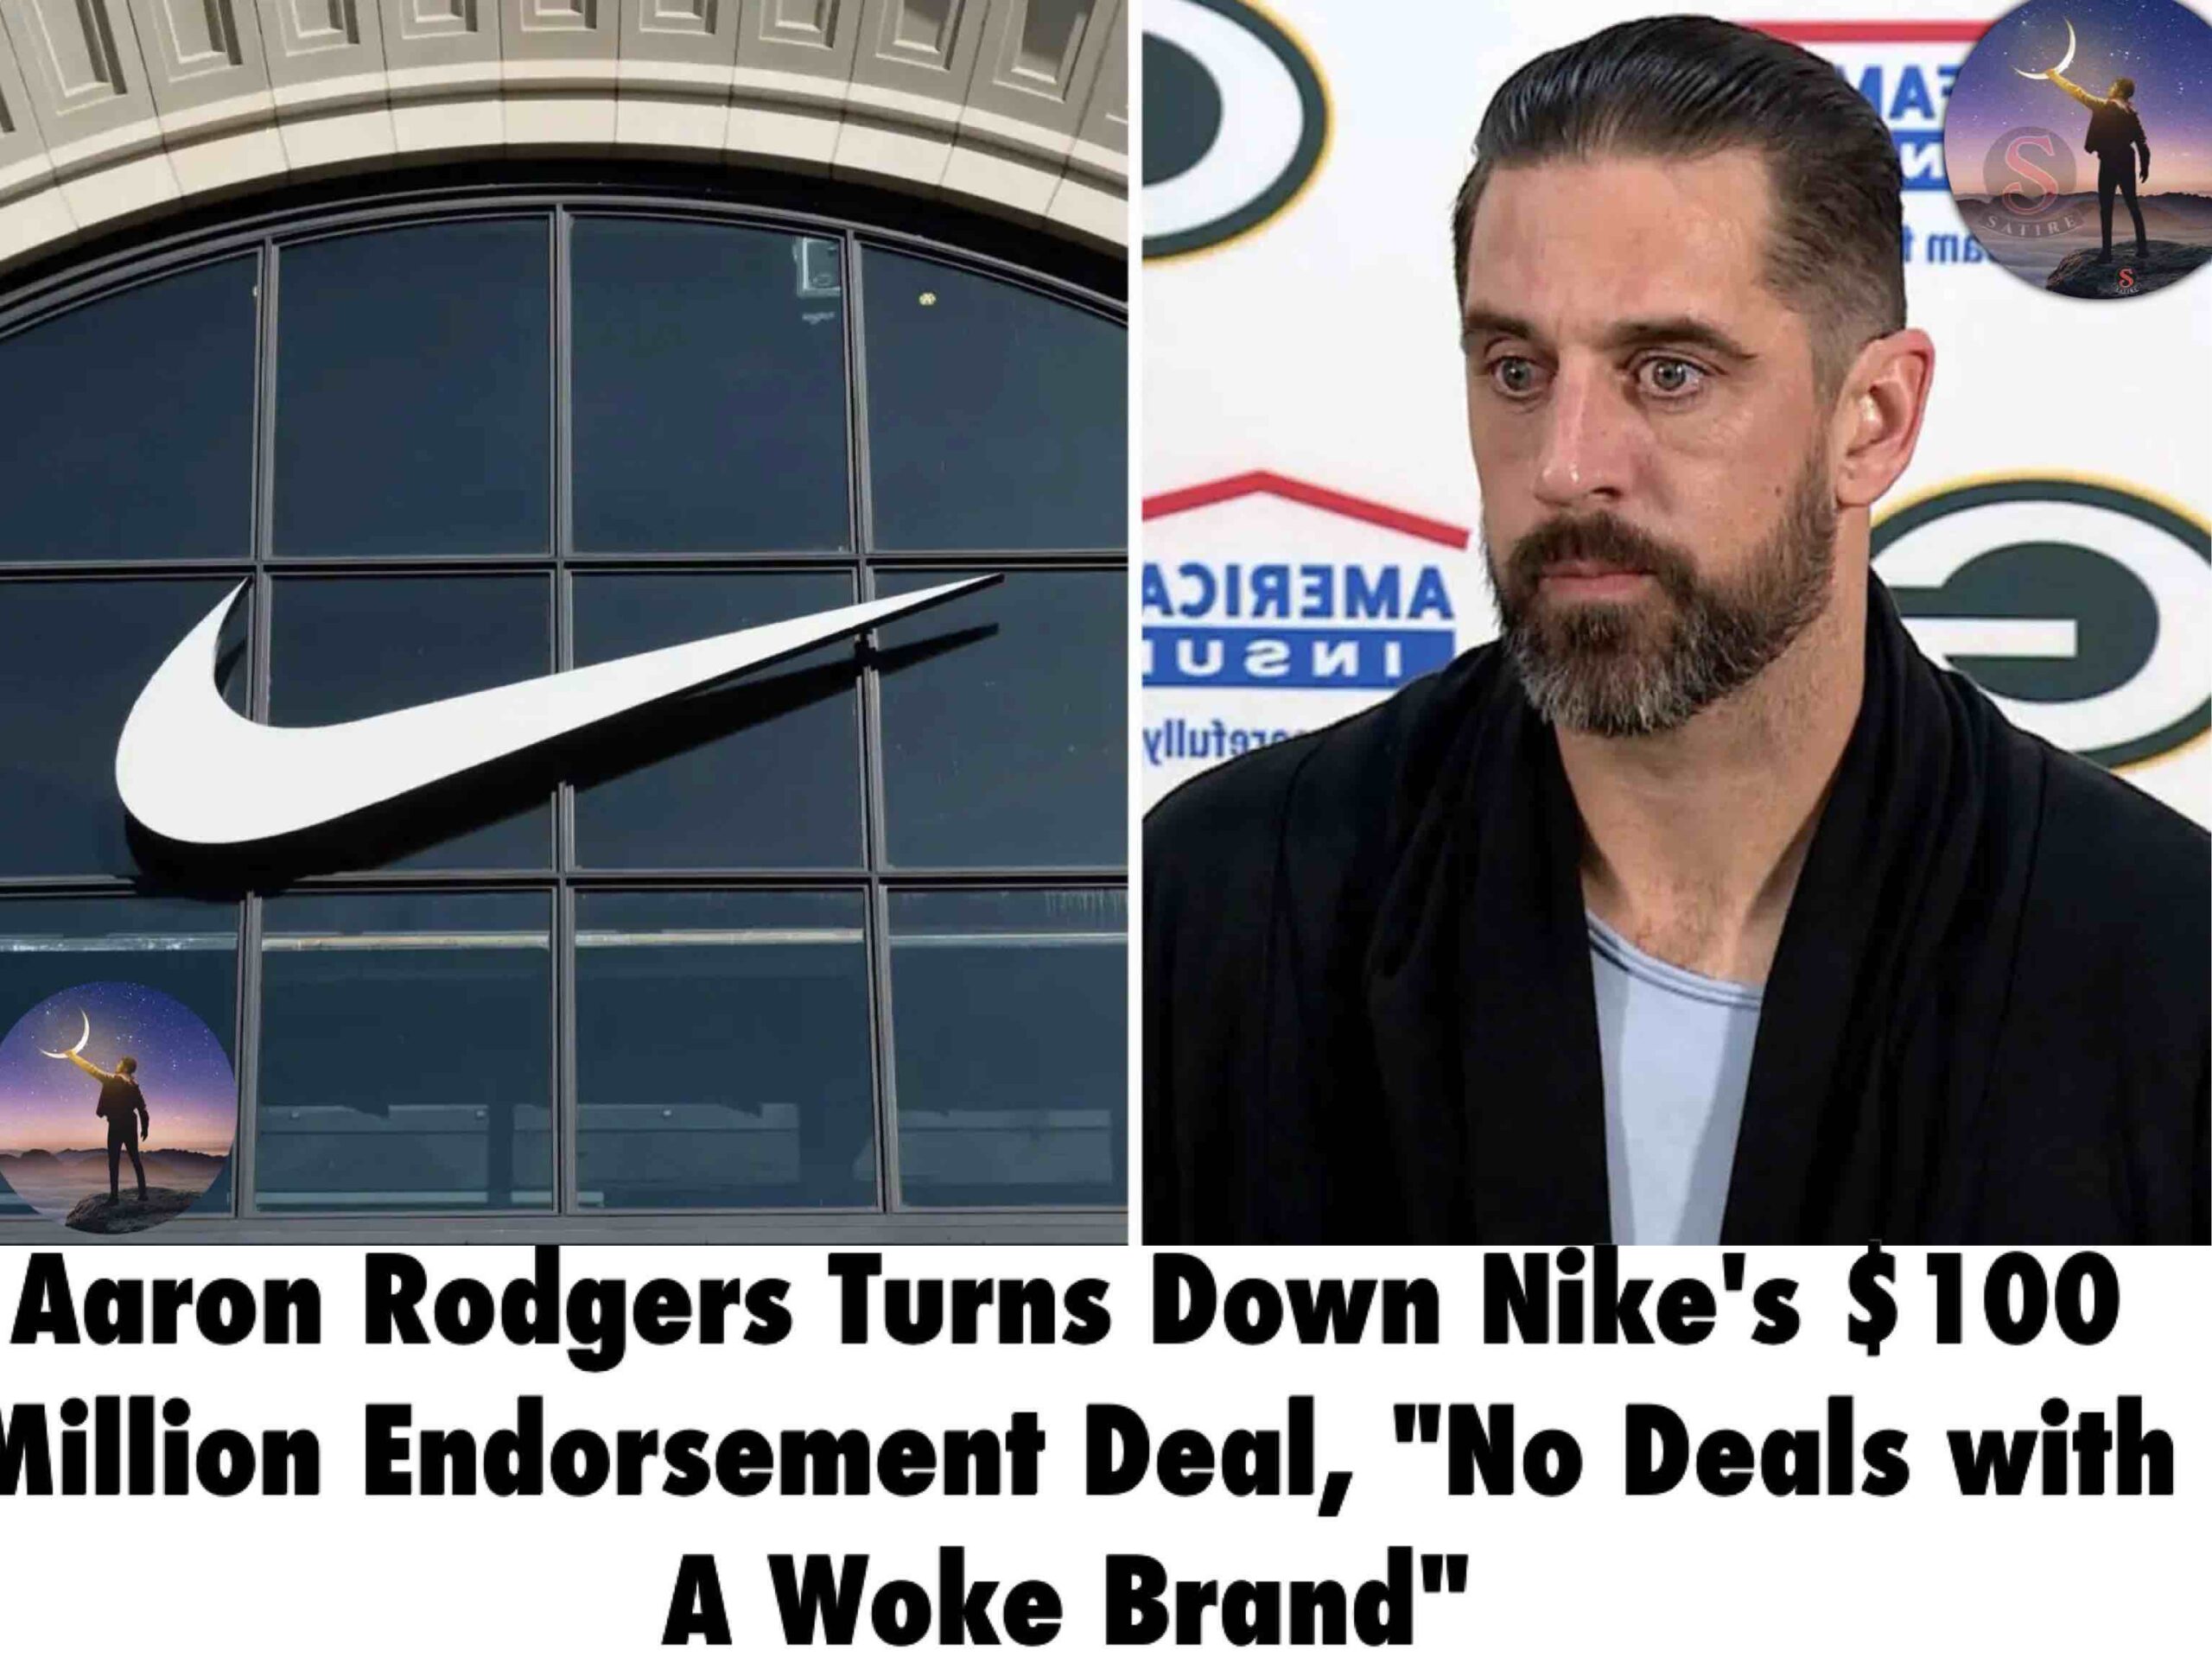 “No Deals with A Woke Brand”: Aaron Rodgers Rejects Woke Nike’s $100 Million Endorsement Offer